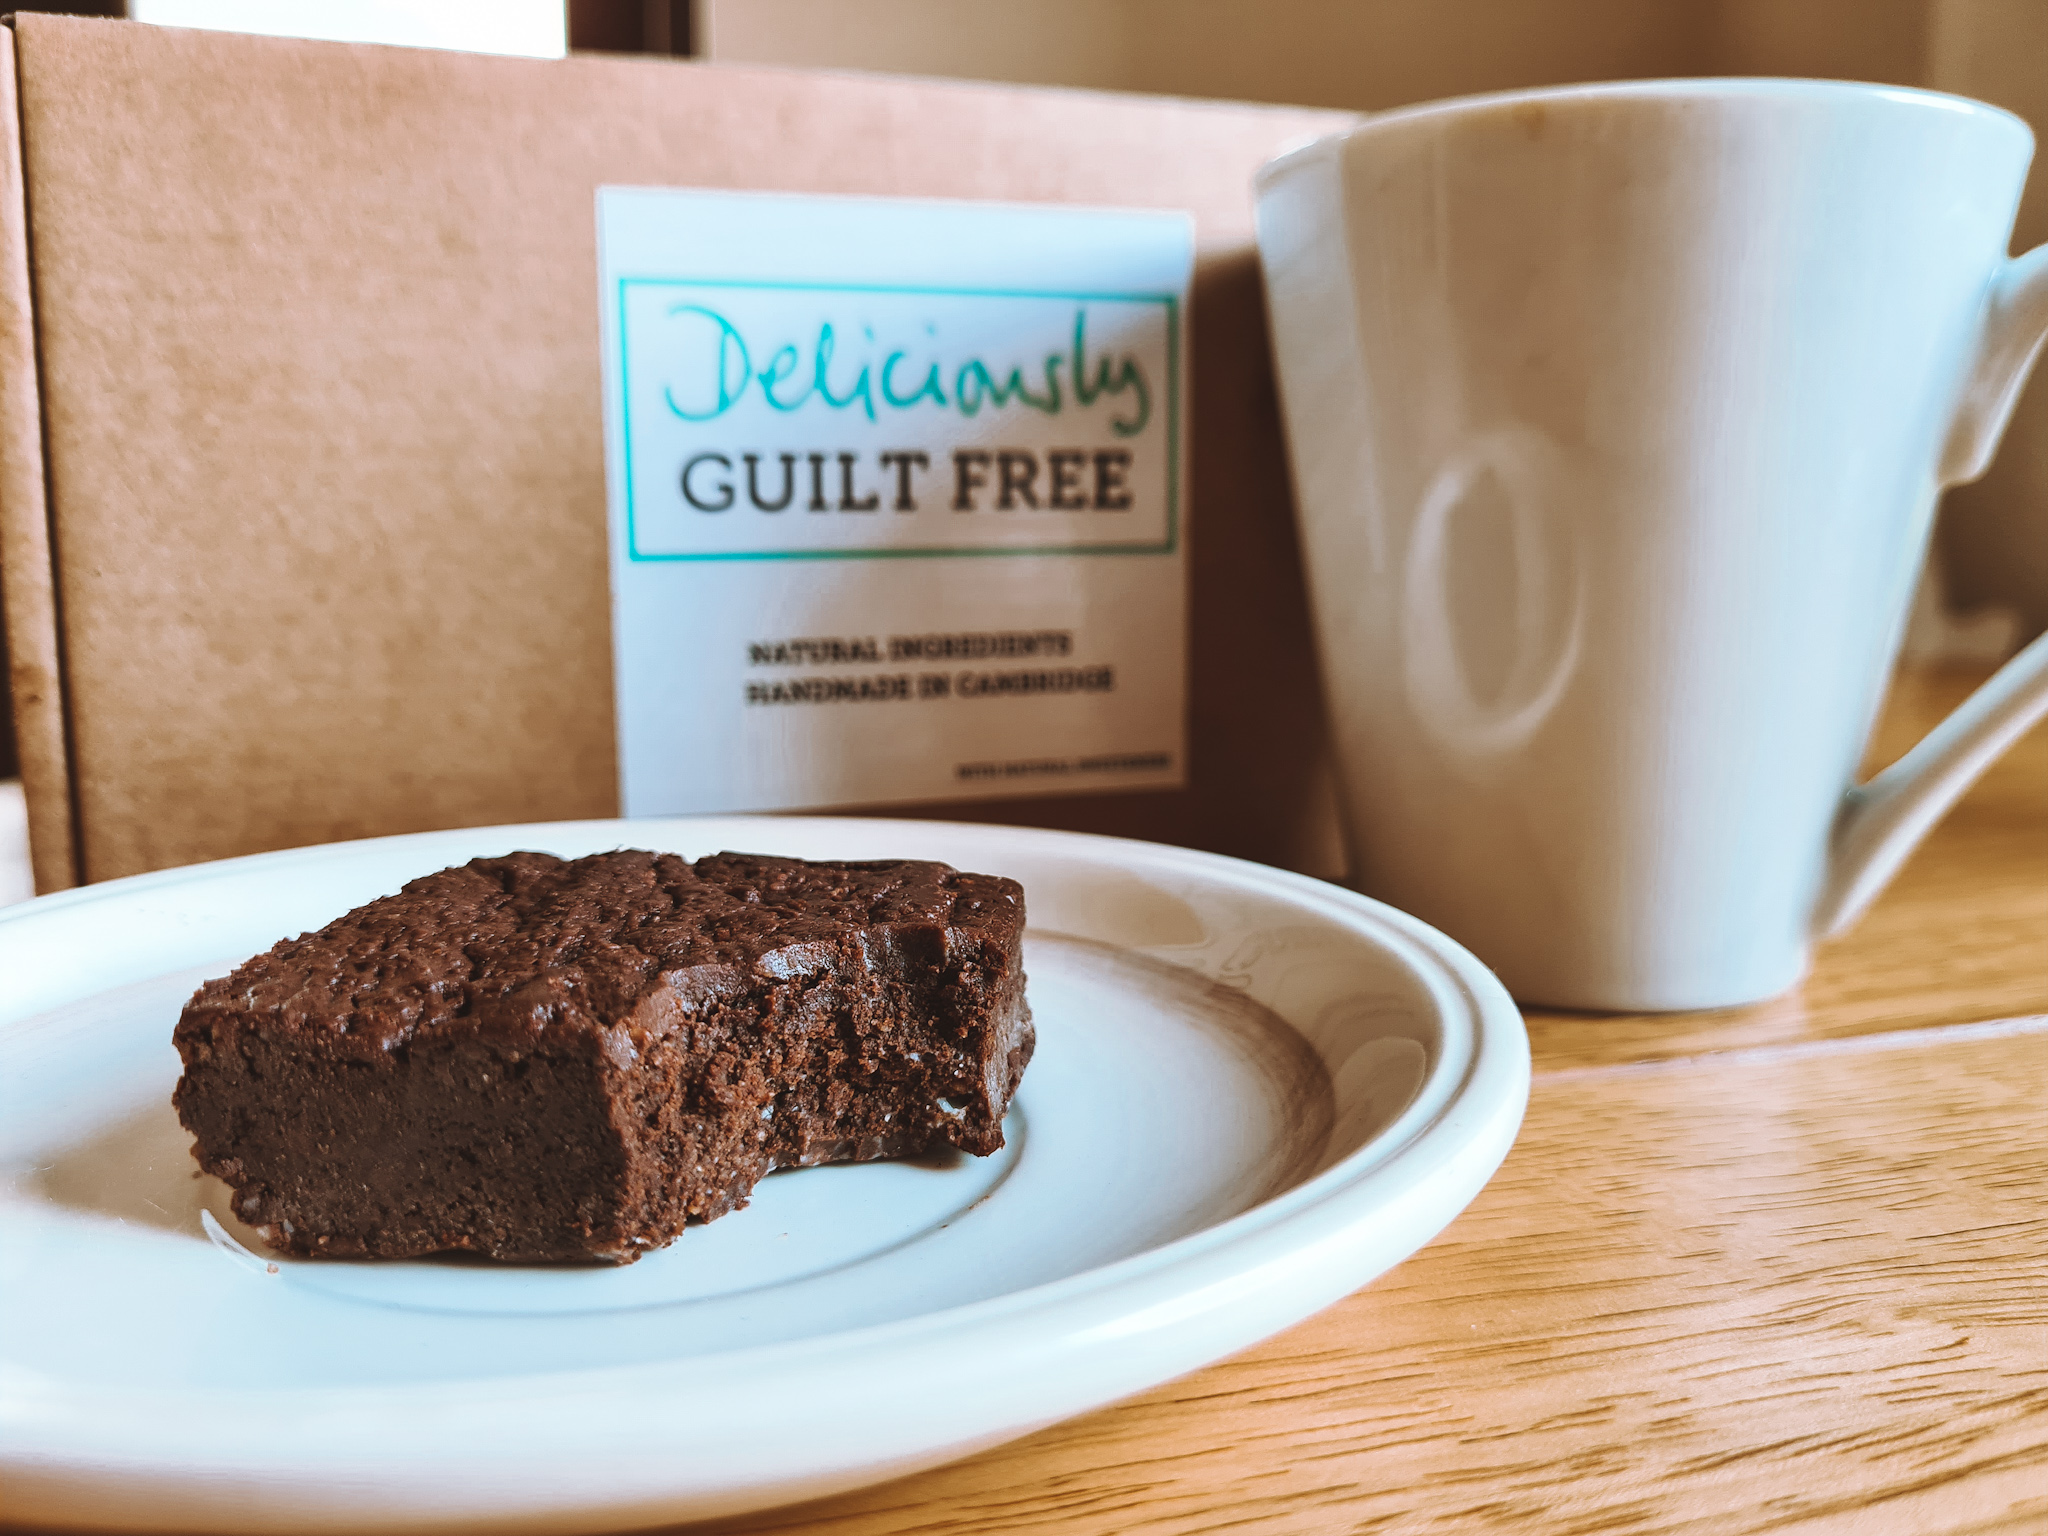 deliciously guilt free box and brownie